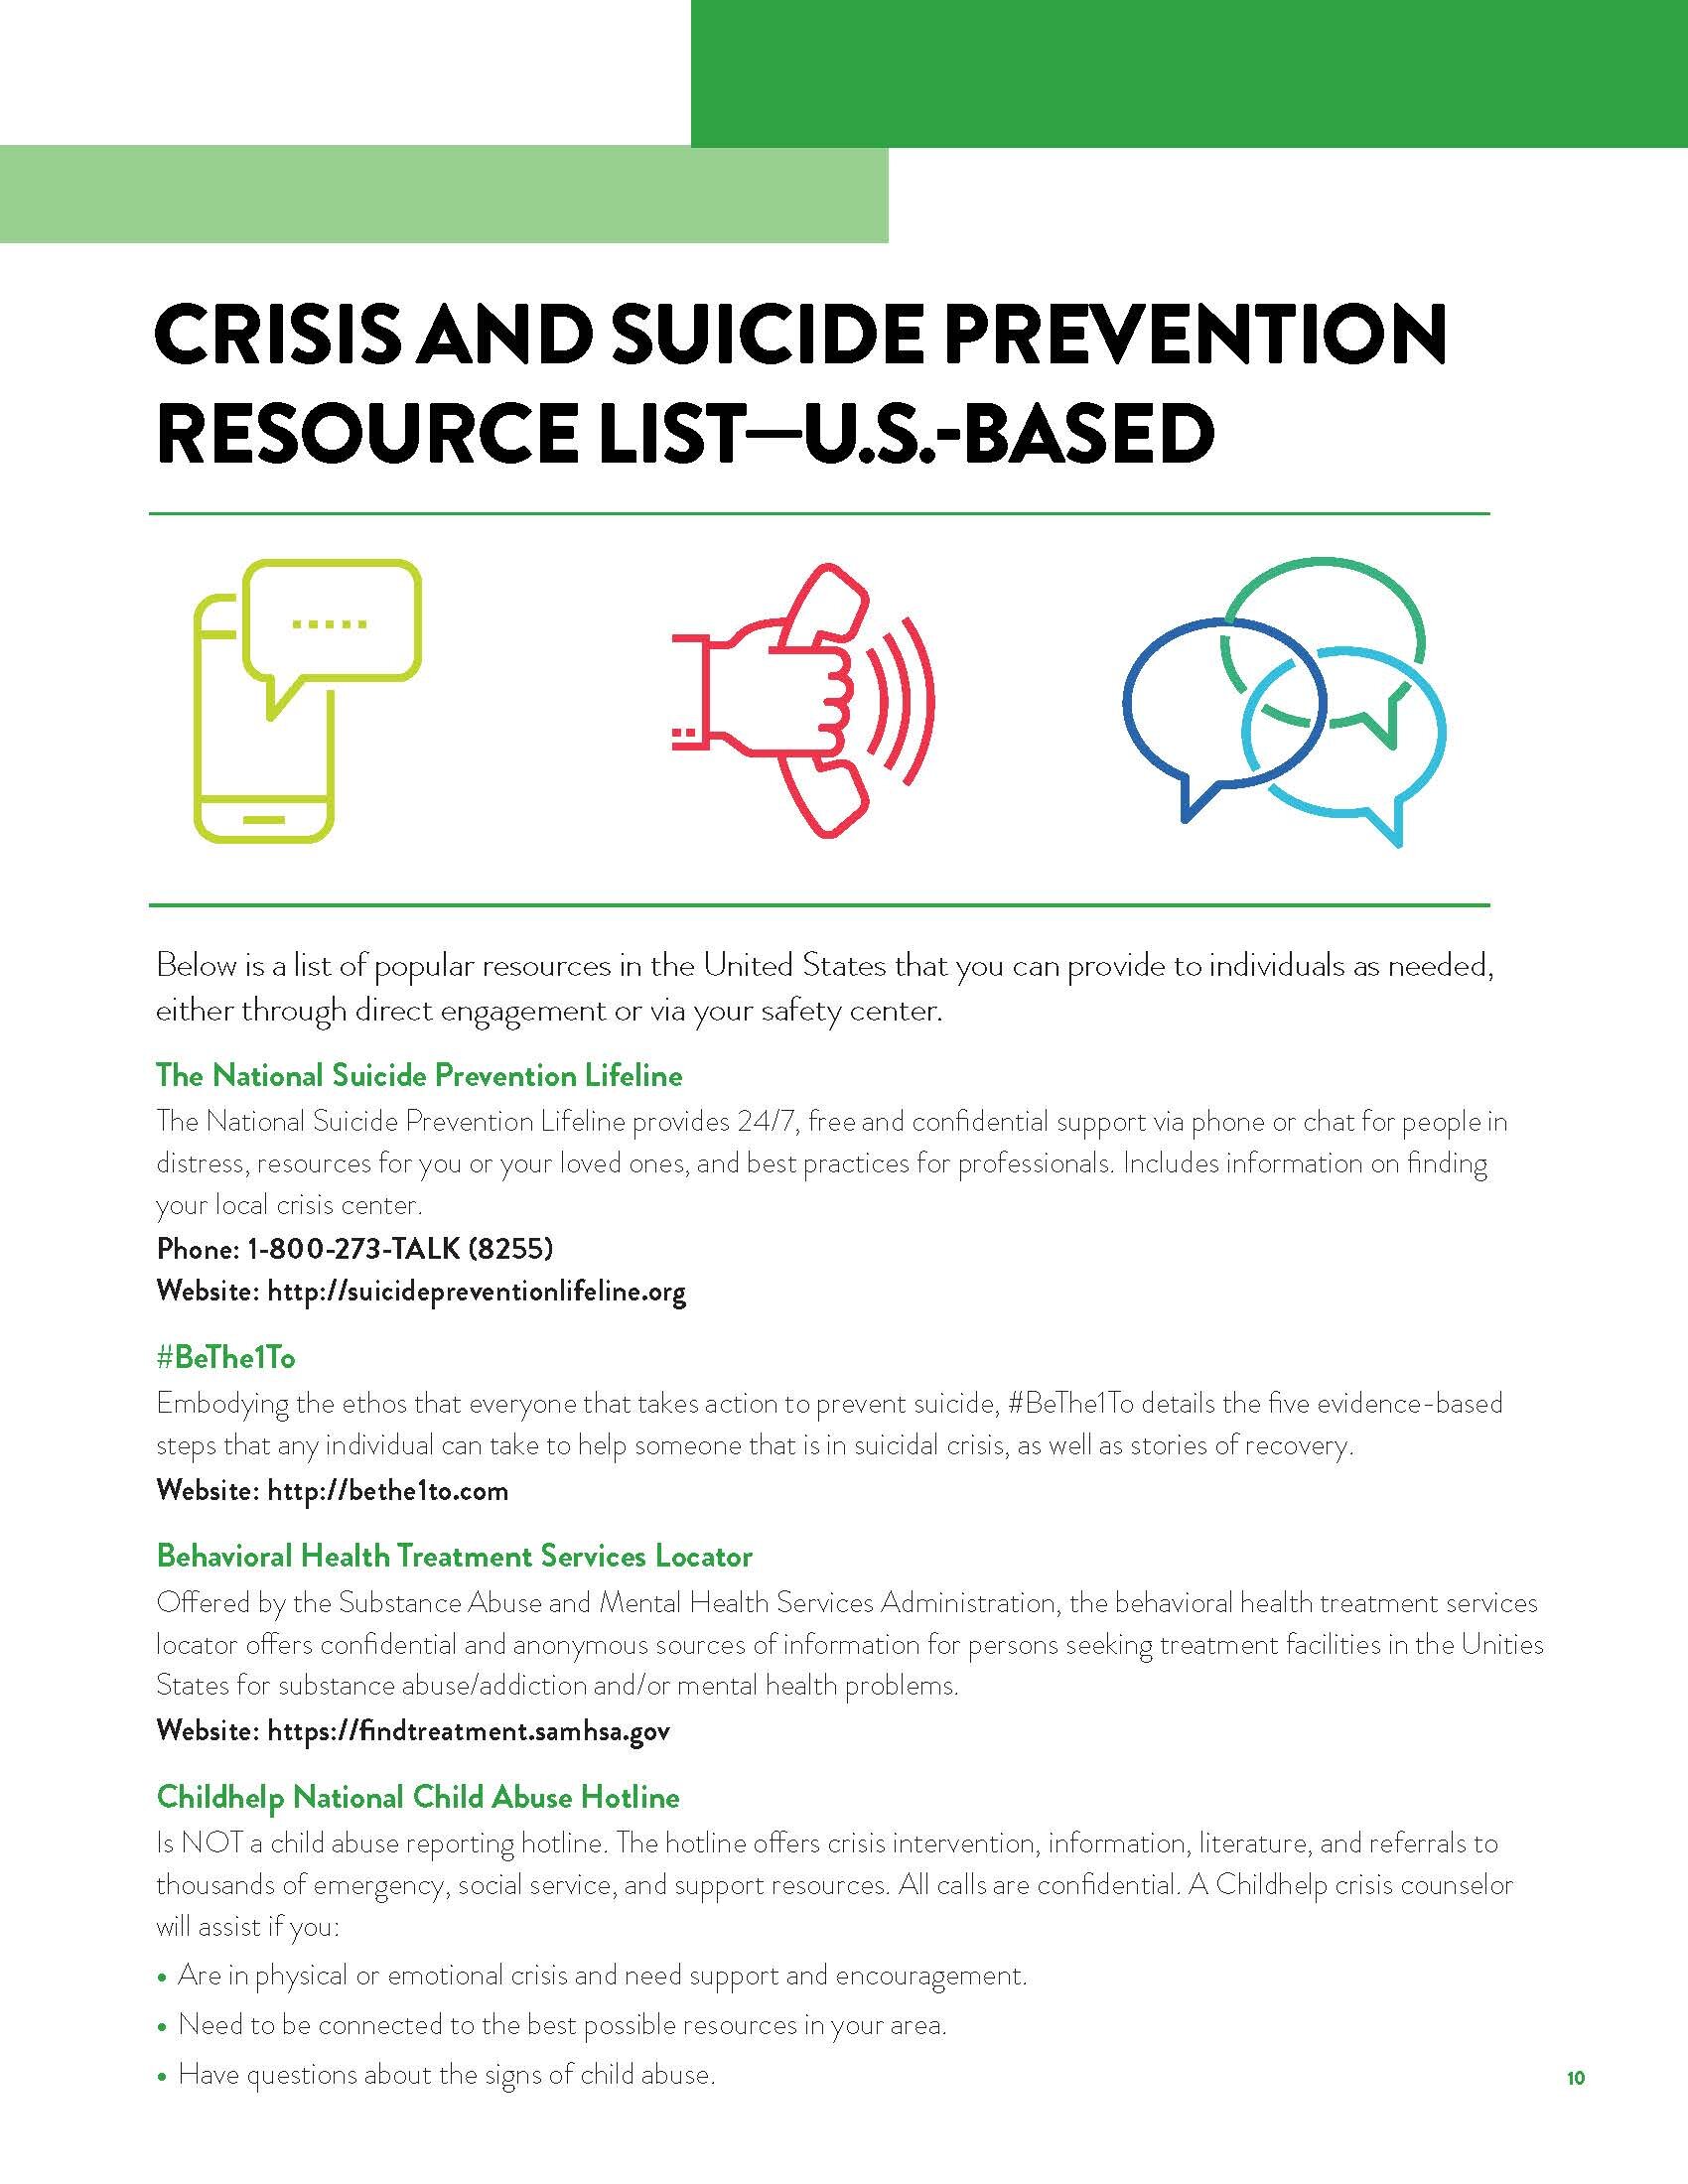 Suicide Prevention National Resources_Page_1.jpg